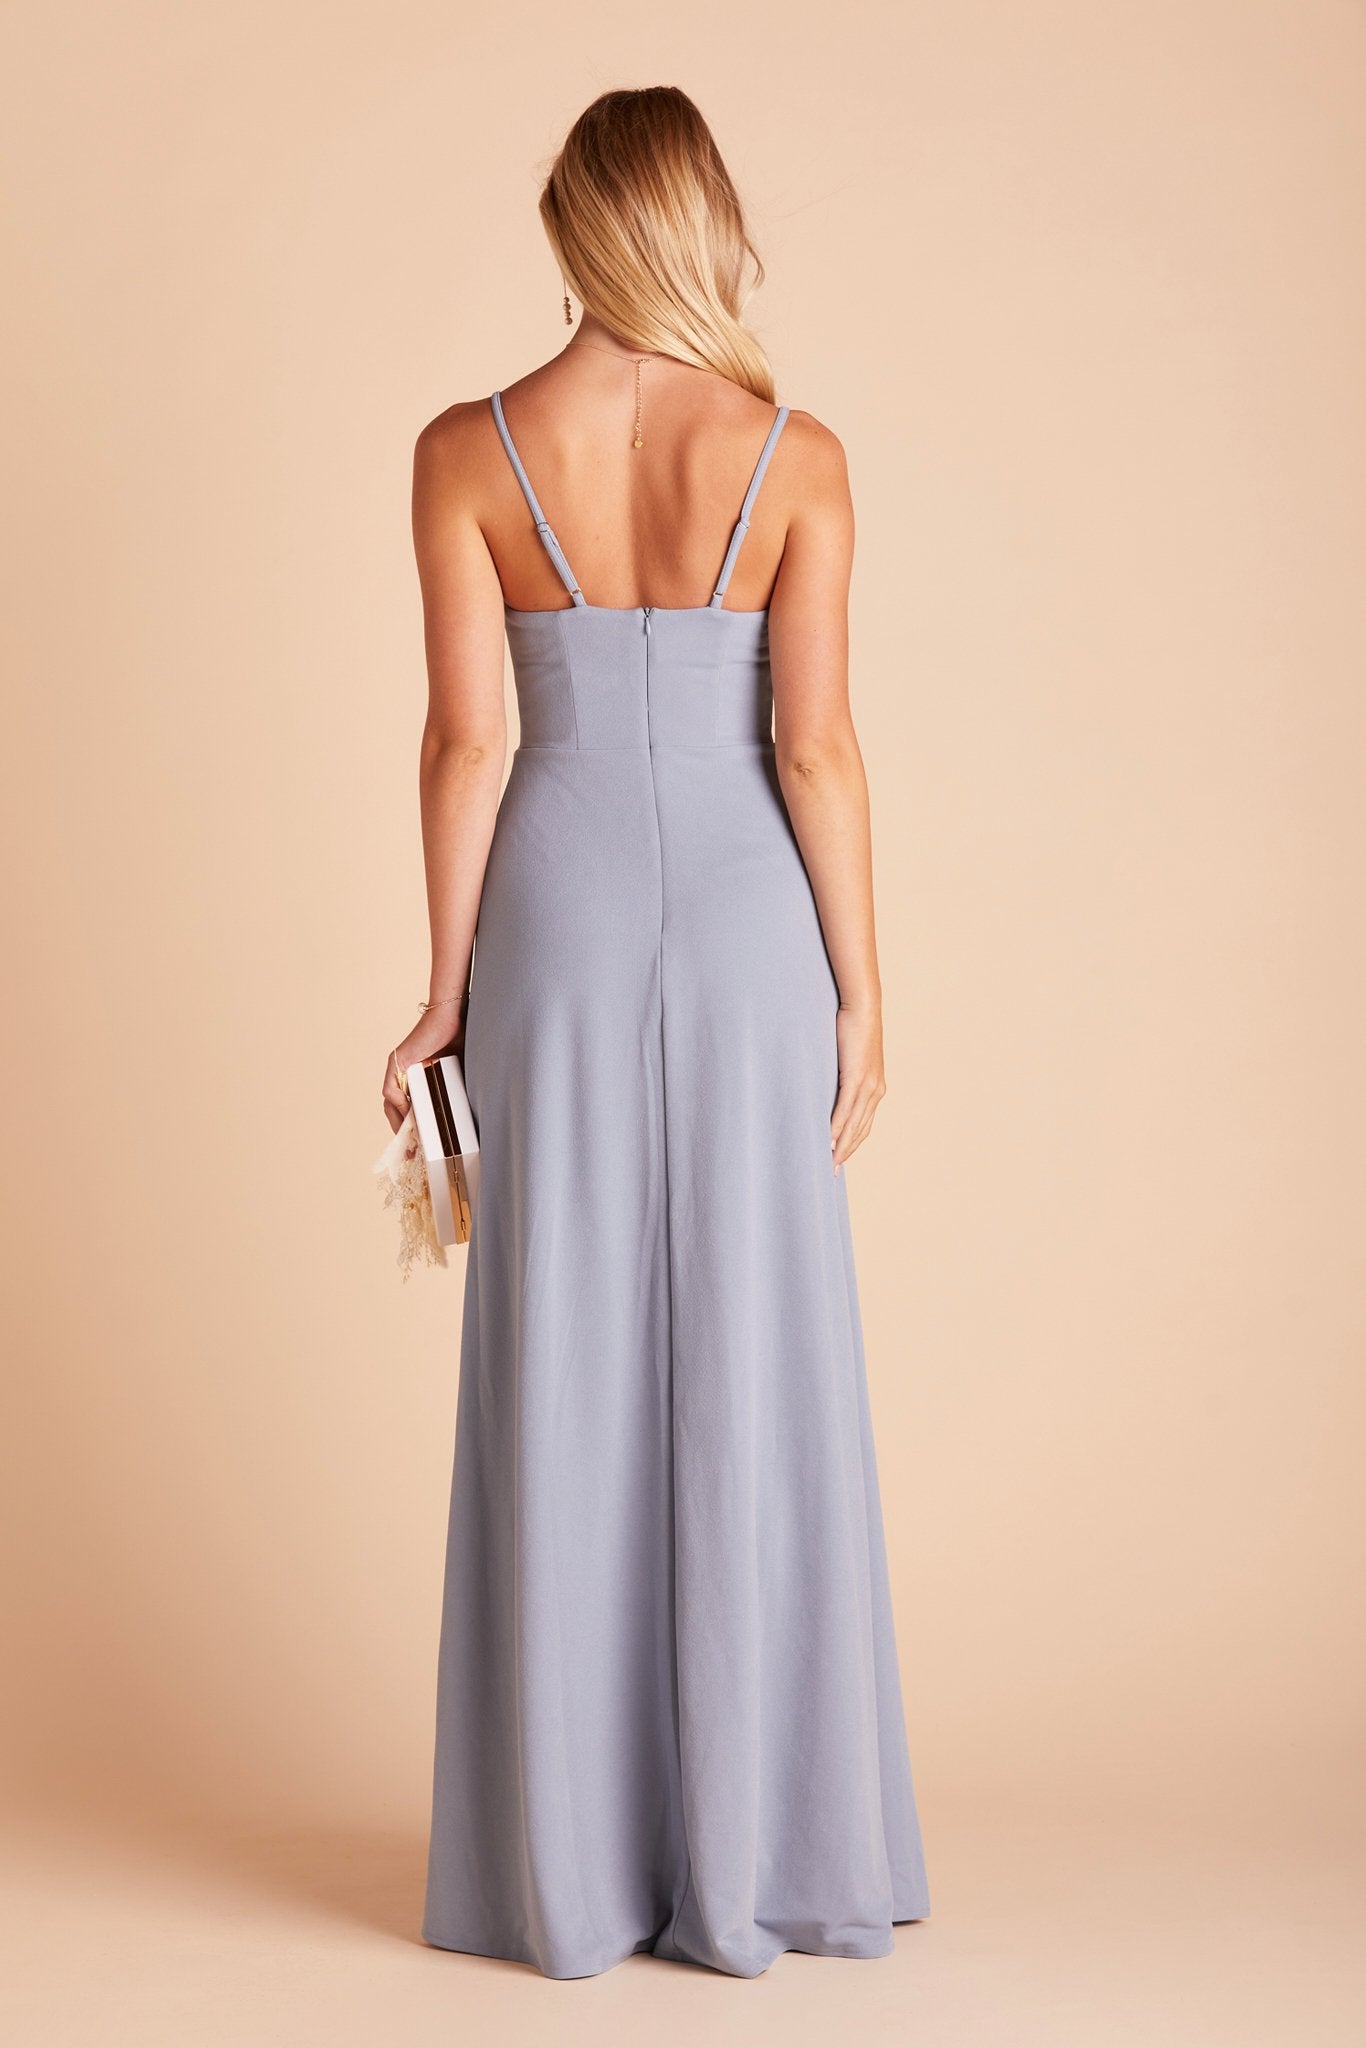 Back view of the Ash Bridesmaid Dress in dusty blue crepe shows skinny adjustable straps as well as an open back just below shoulder blades.